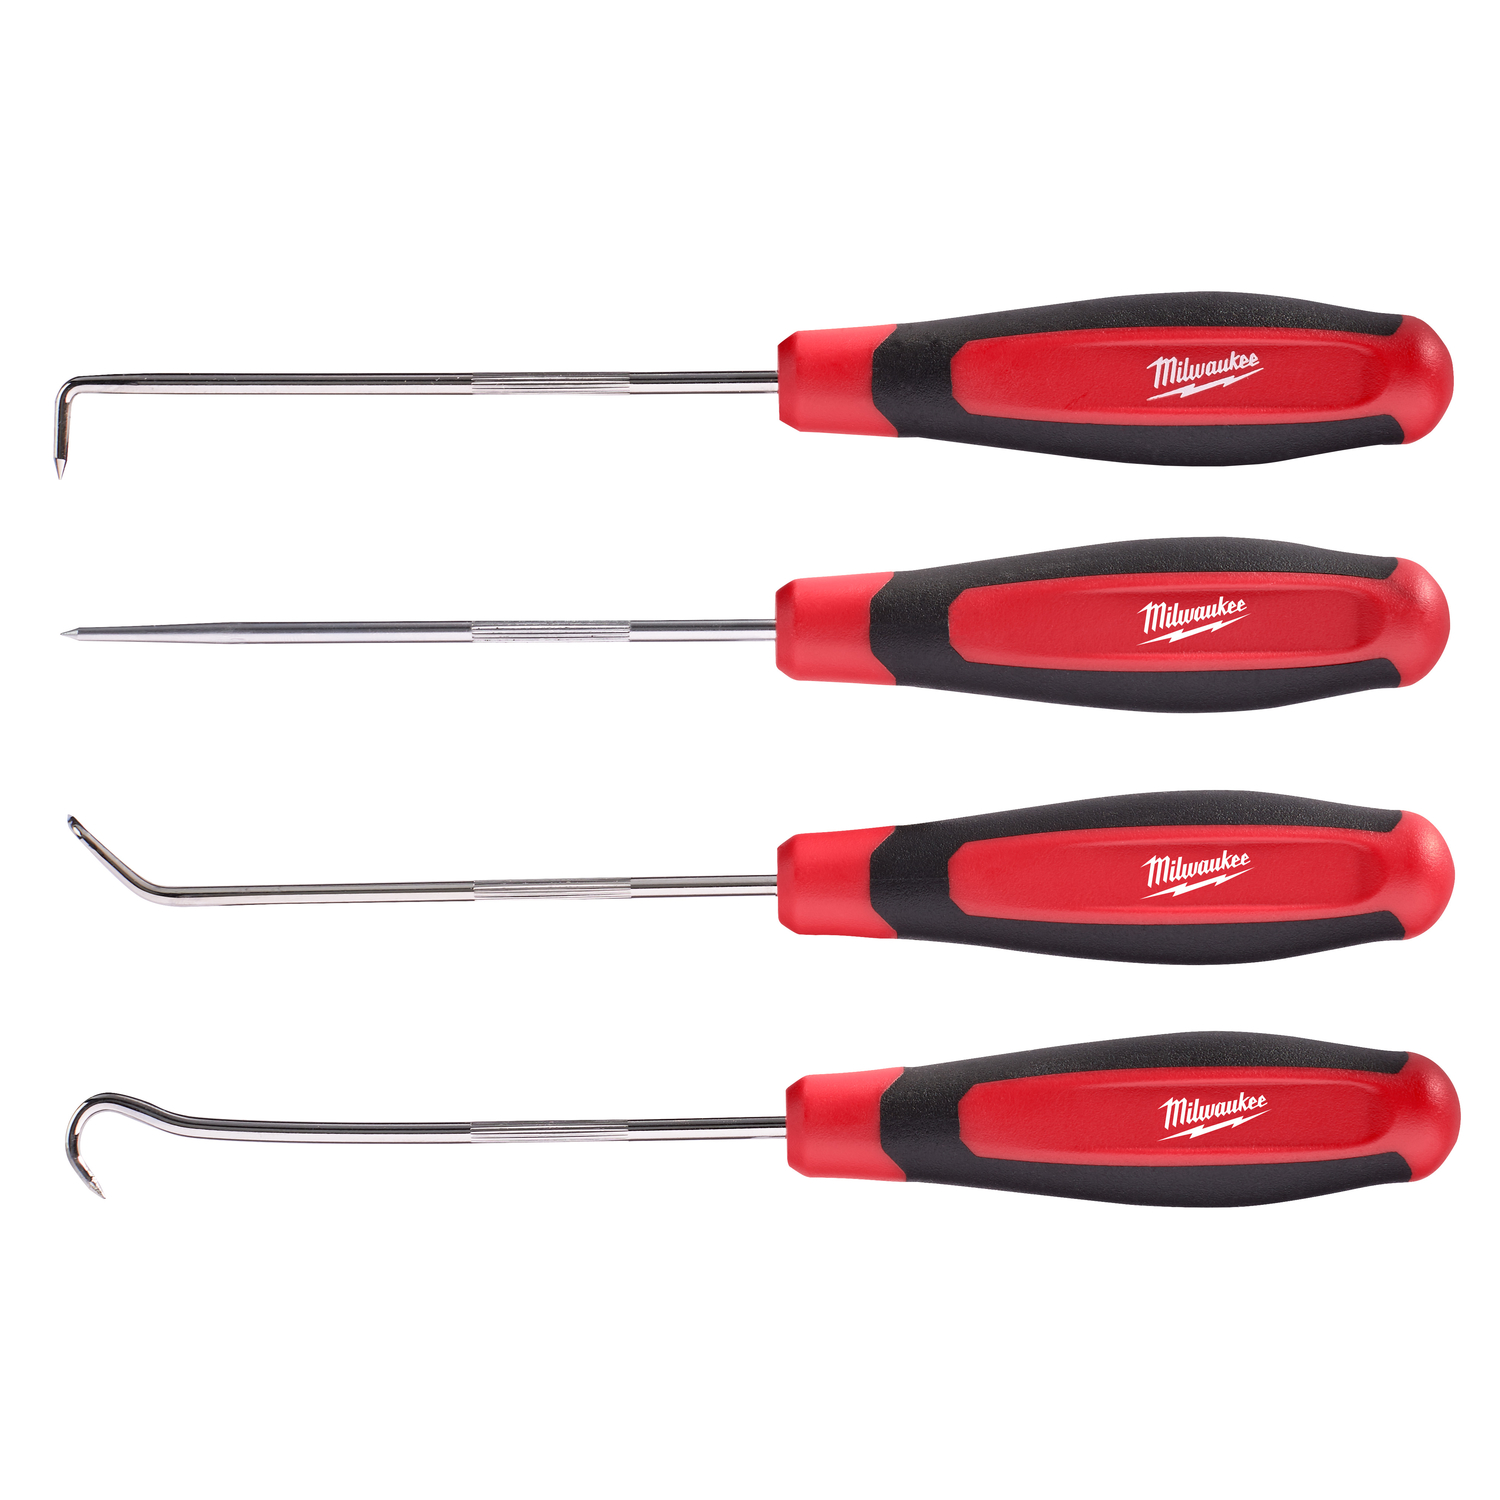 Photos - Screwdriver Milwaukee 4 in. Chrome Plated Steel Hook and Pick Set 4 pc 48-22-9215 